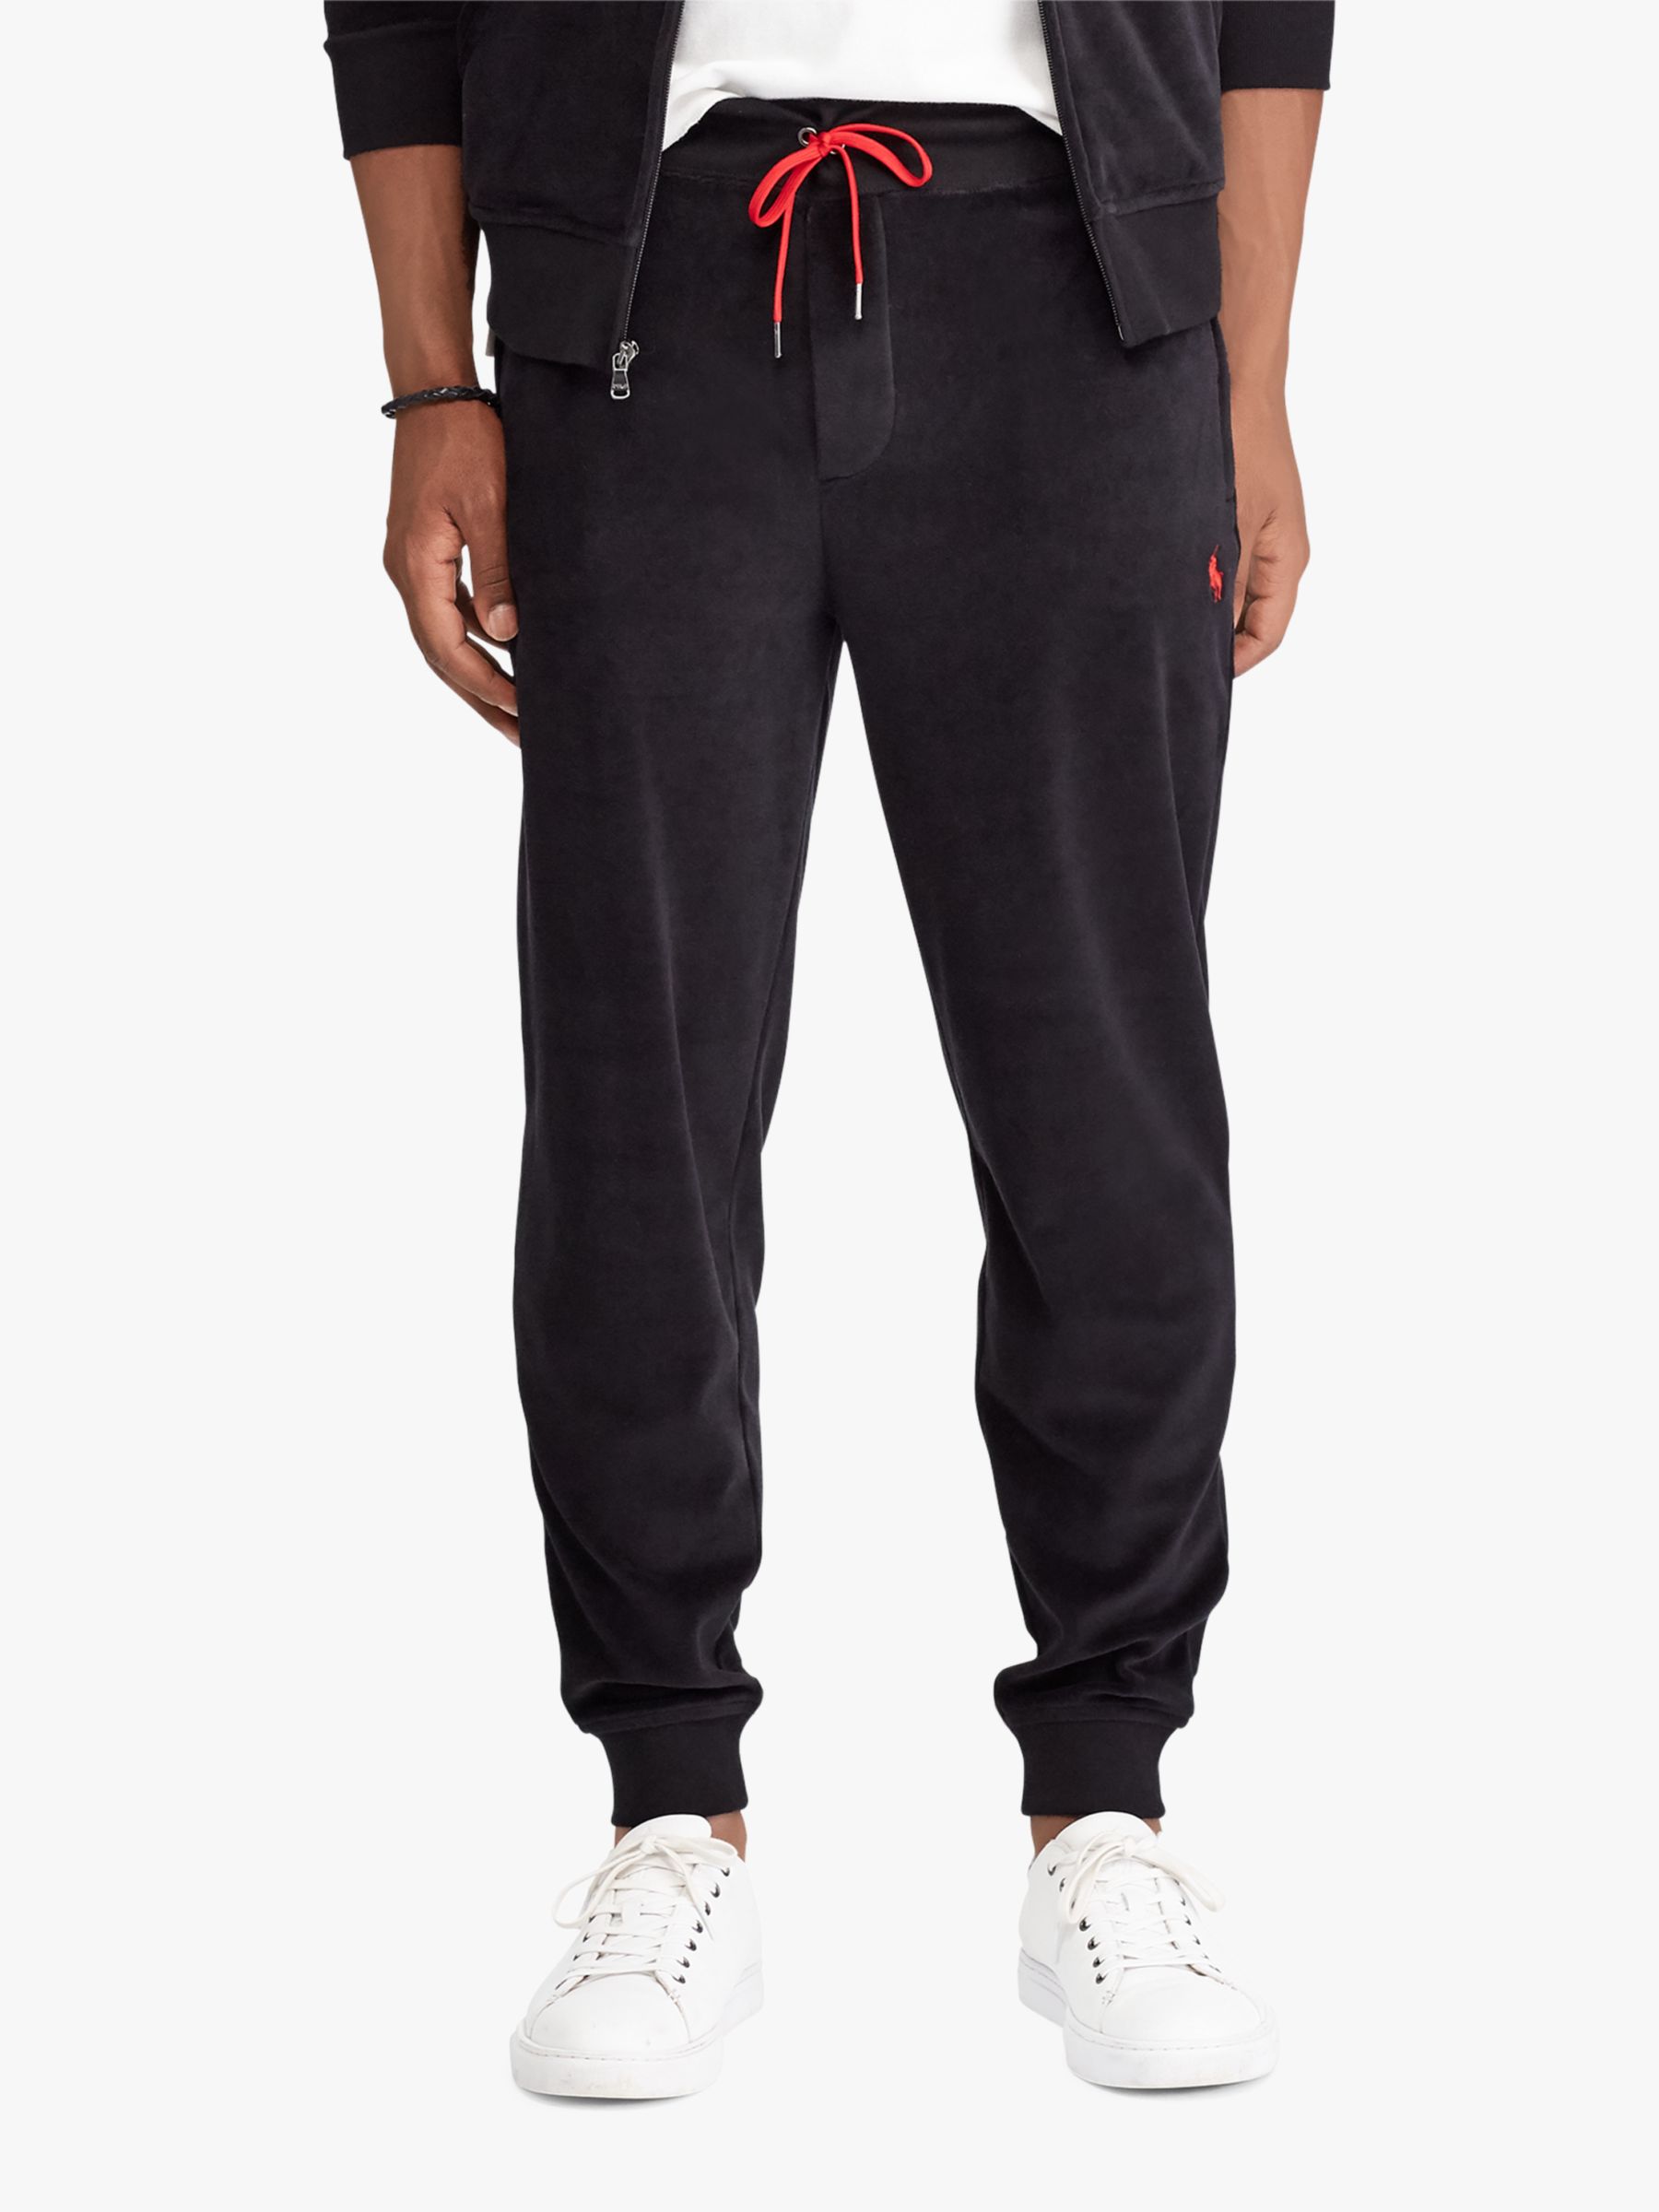 polo velour sweat suits